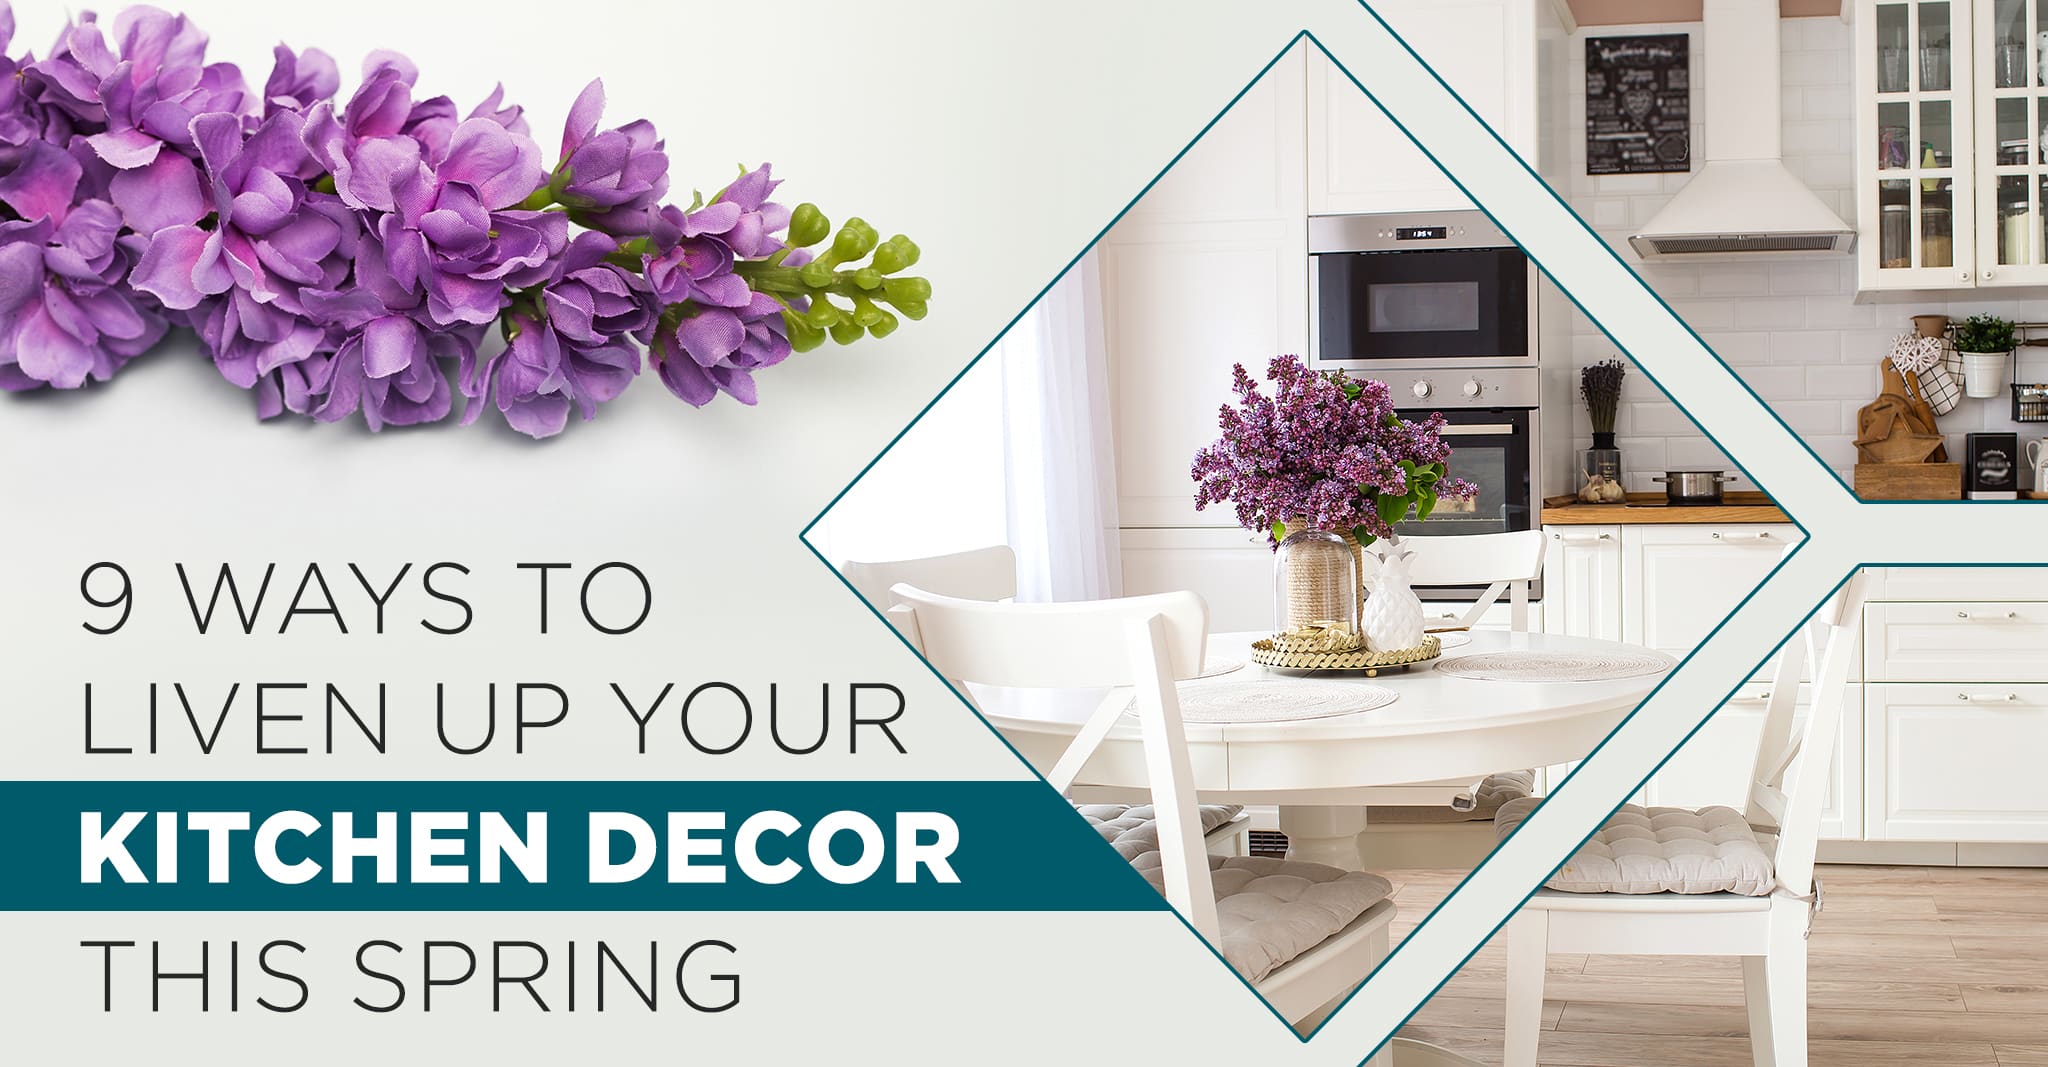 https://www.simplykitchenusa.com/wp-content/uploads/9-Ways-to-Liven-Up-Your-Kitchen-Decor-This-Spring.jpg